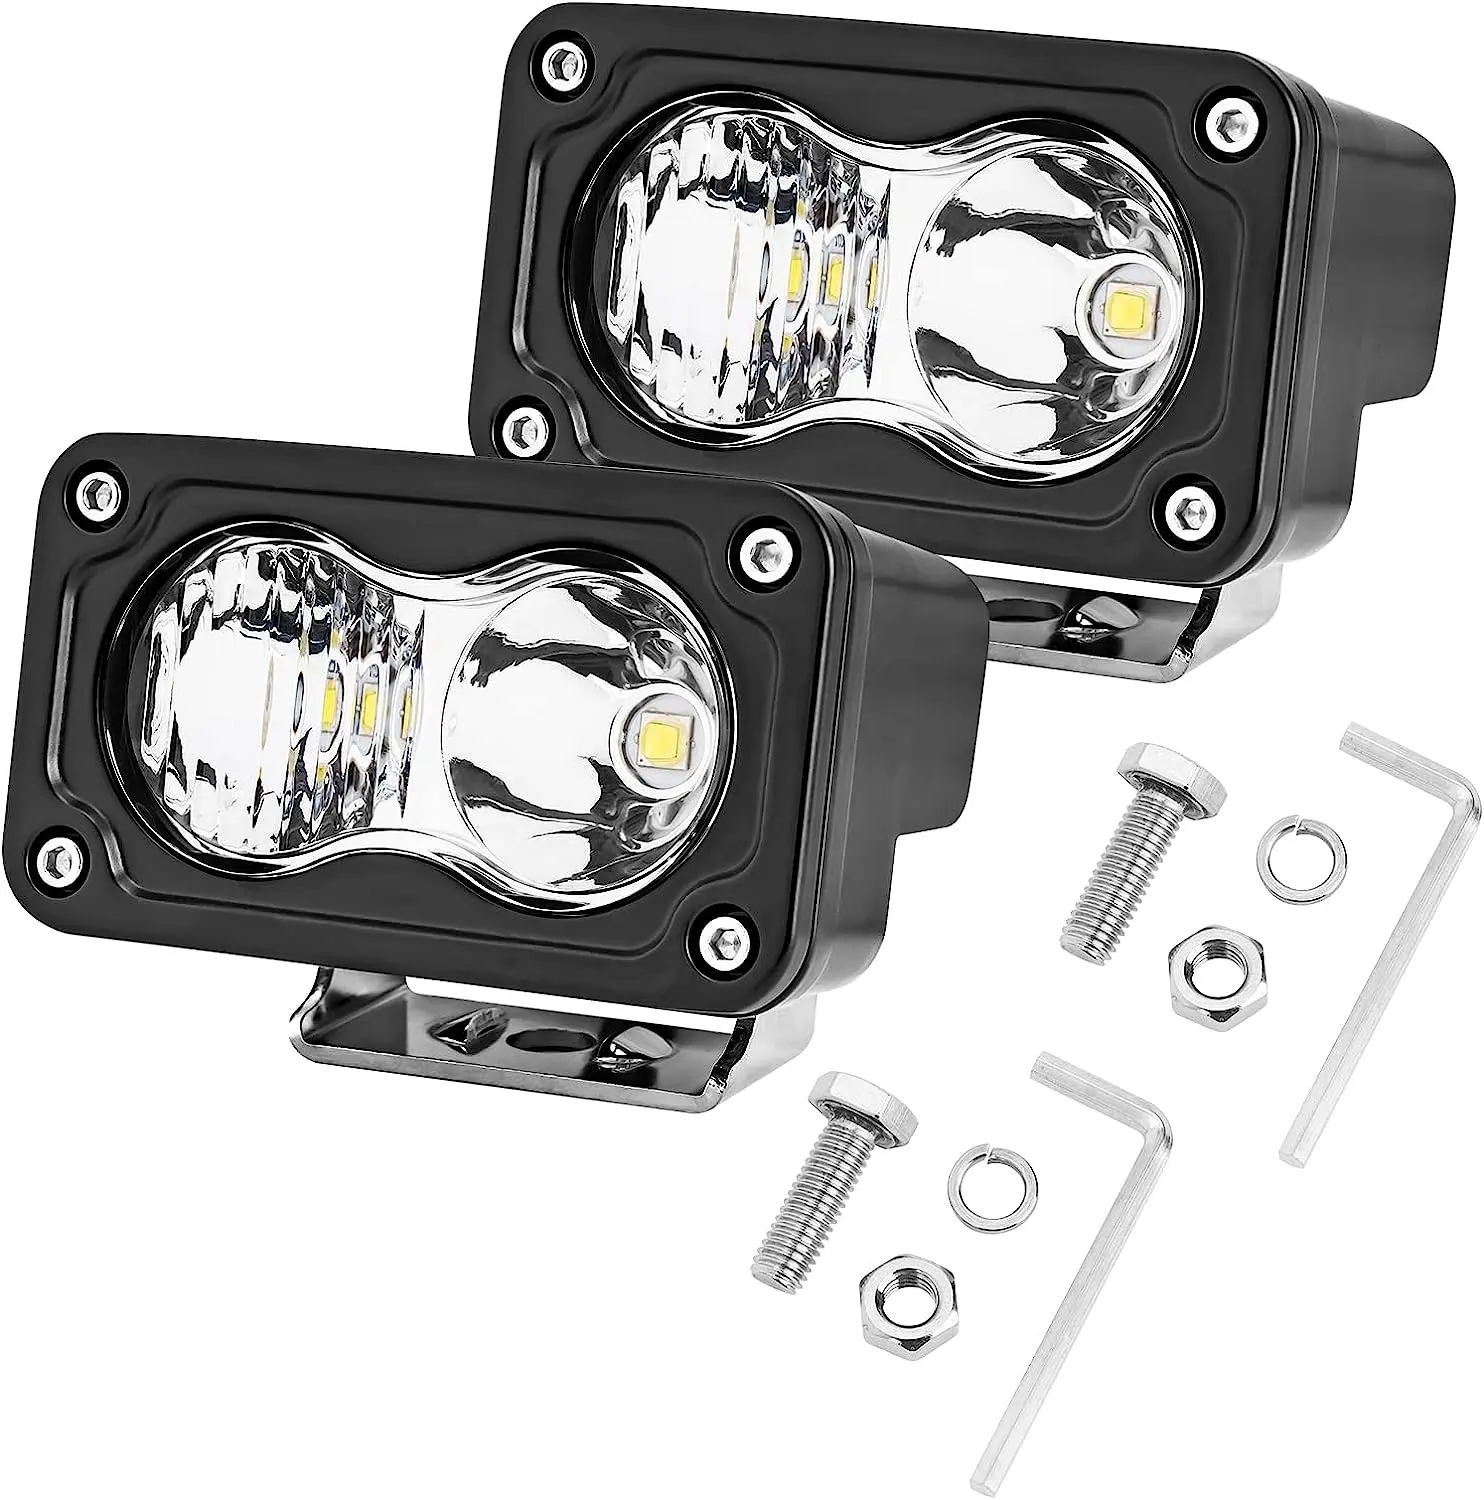 3 Inch 20W Driving Lights Off Road Combo Beam Super Bright Work Light Cube LED Bumper Pod Fog Light for motorcycle